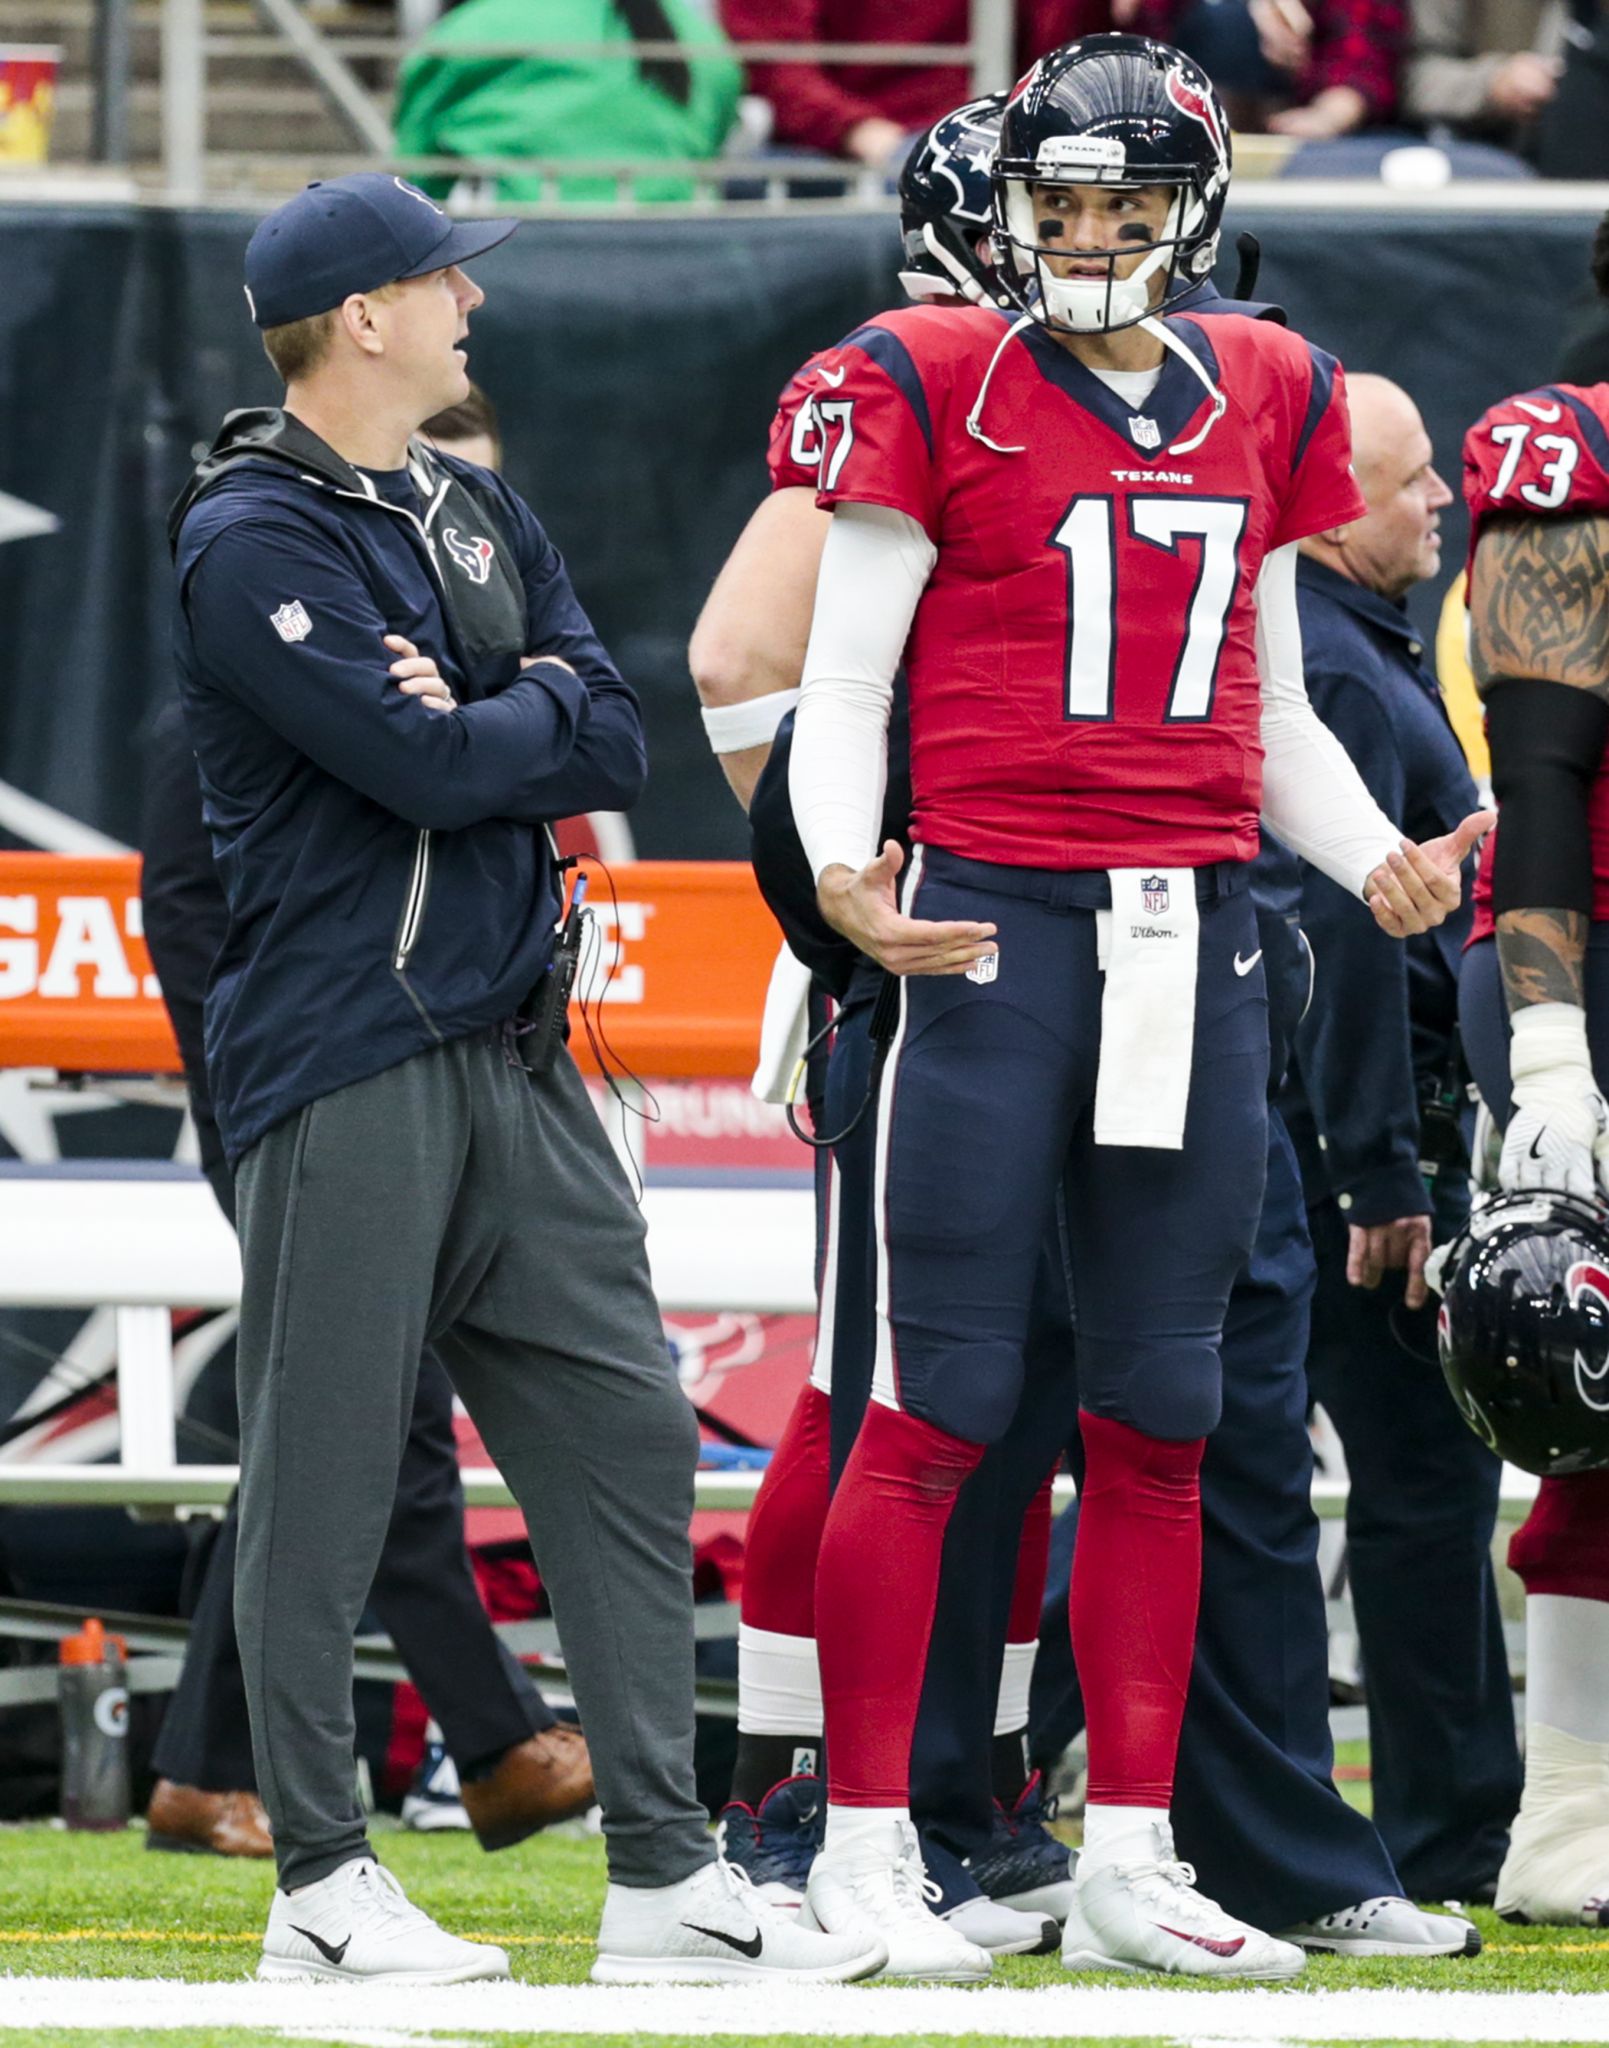 Texans' Brock Osweiler on being benched: 'It didn't surprise me'